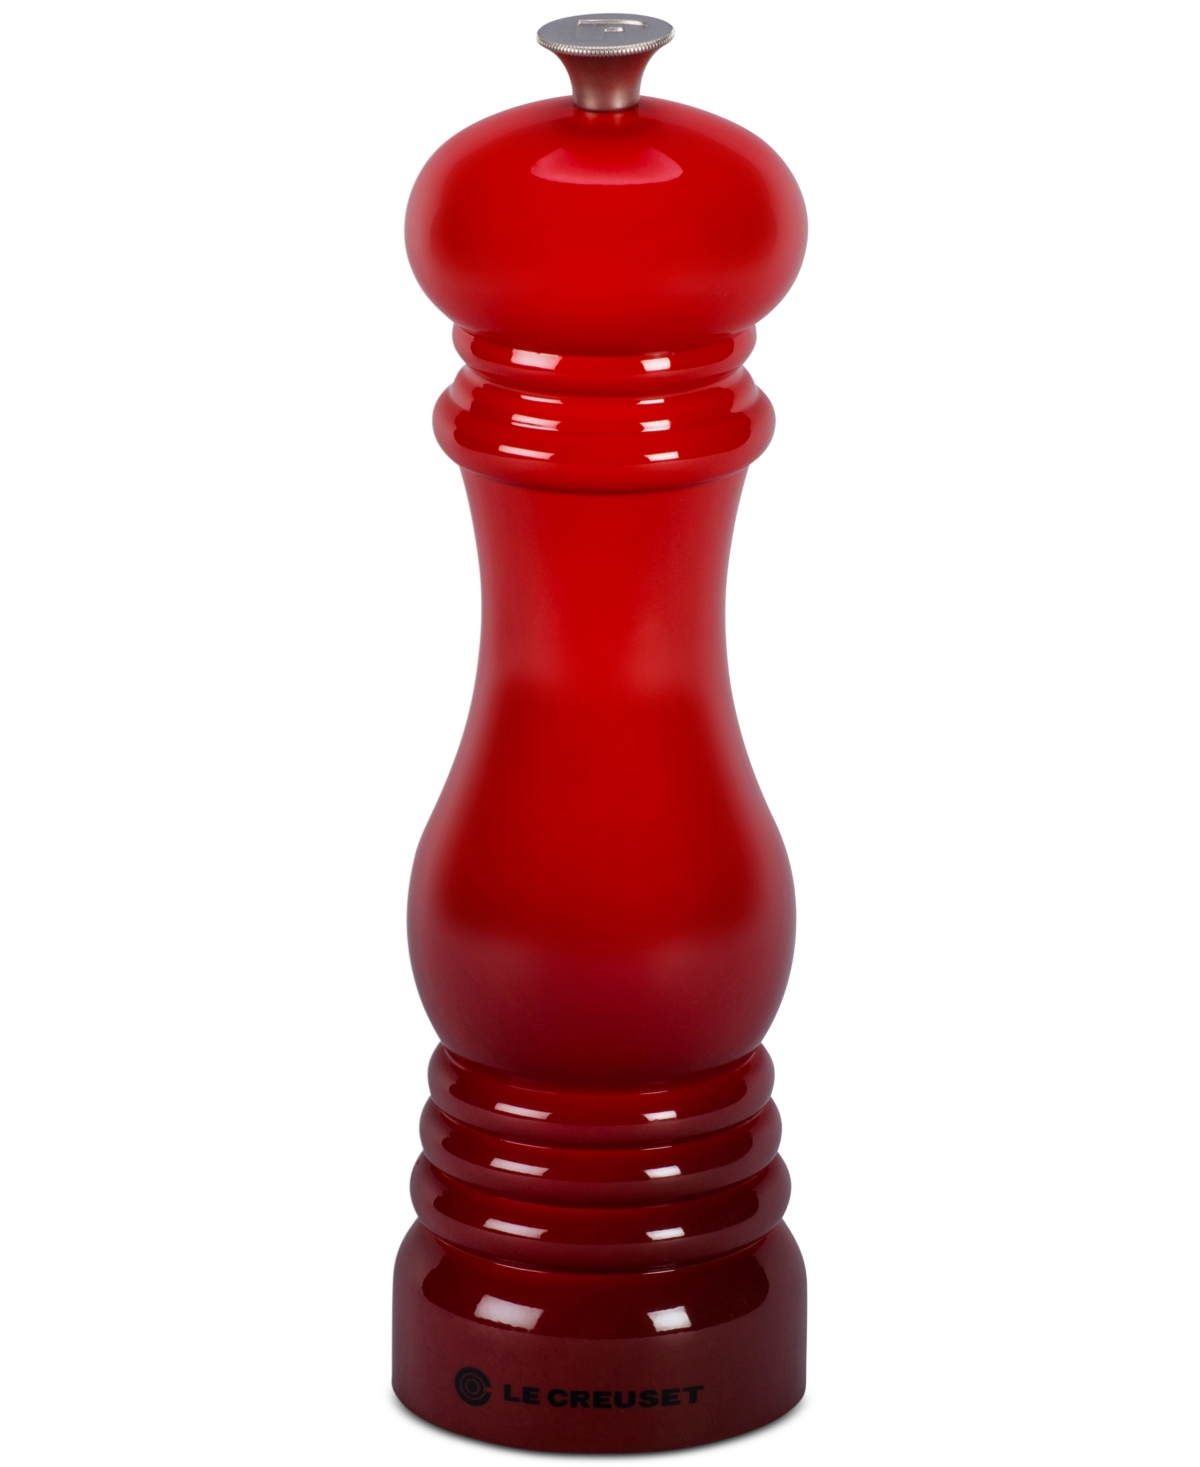 LE CREUSET PEPPER MILL WITH ADJUSTABLE GRIND SETTING